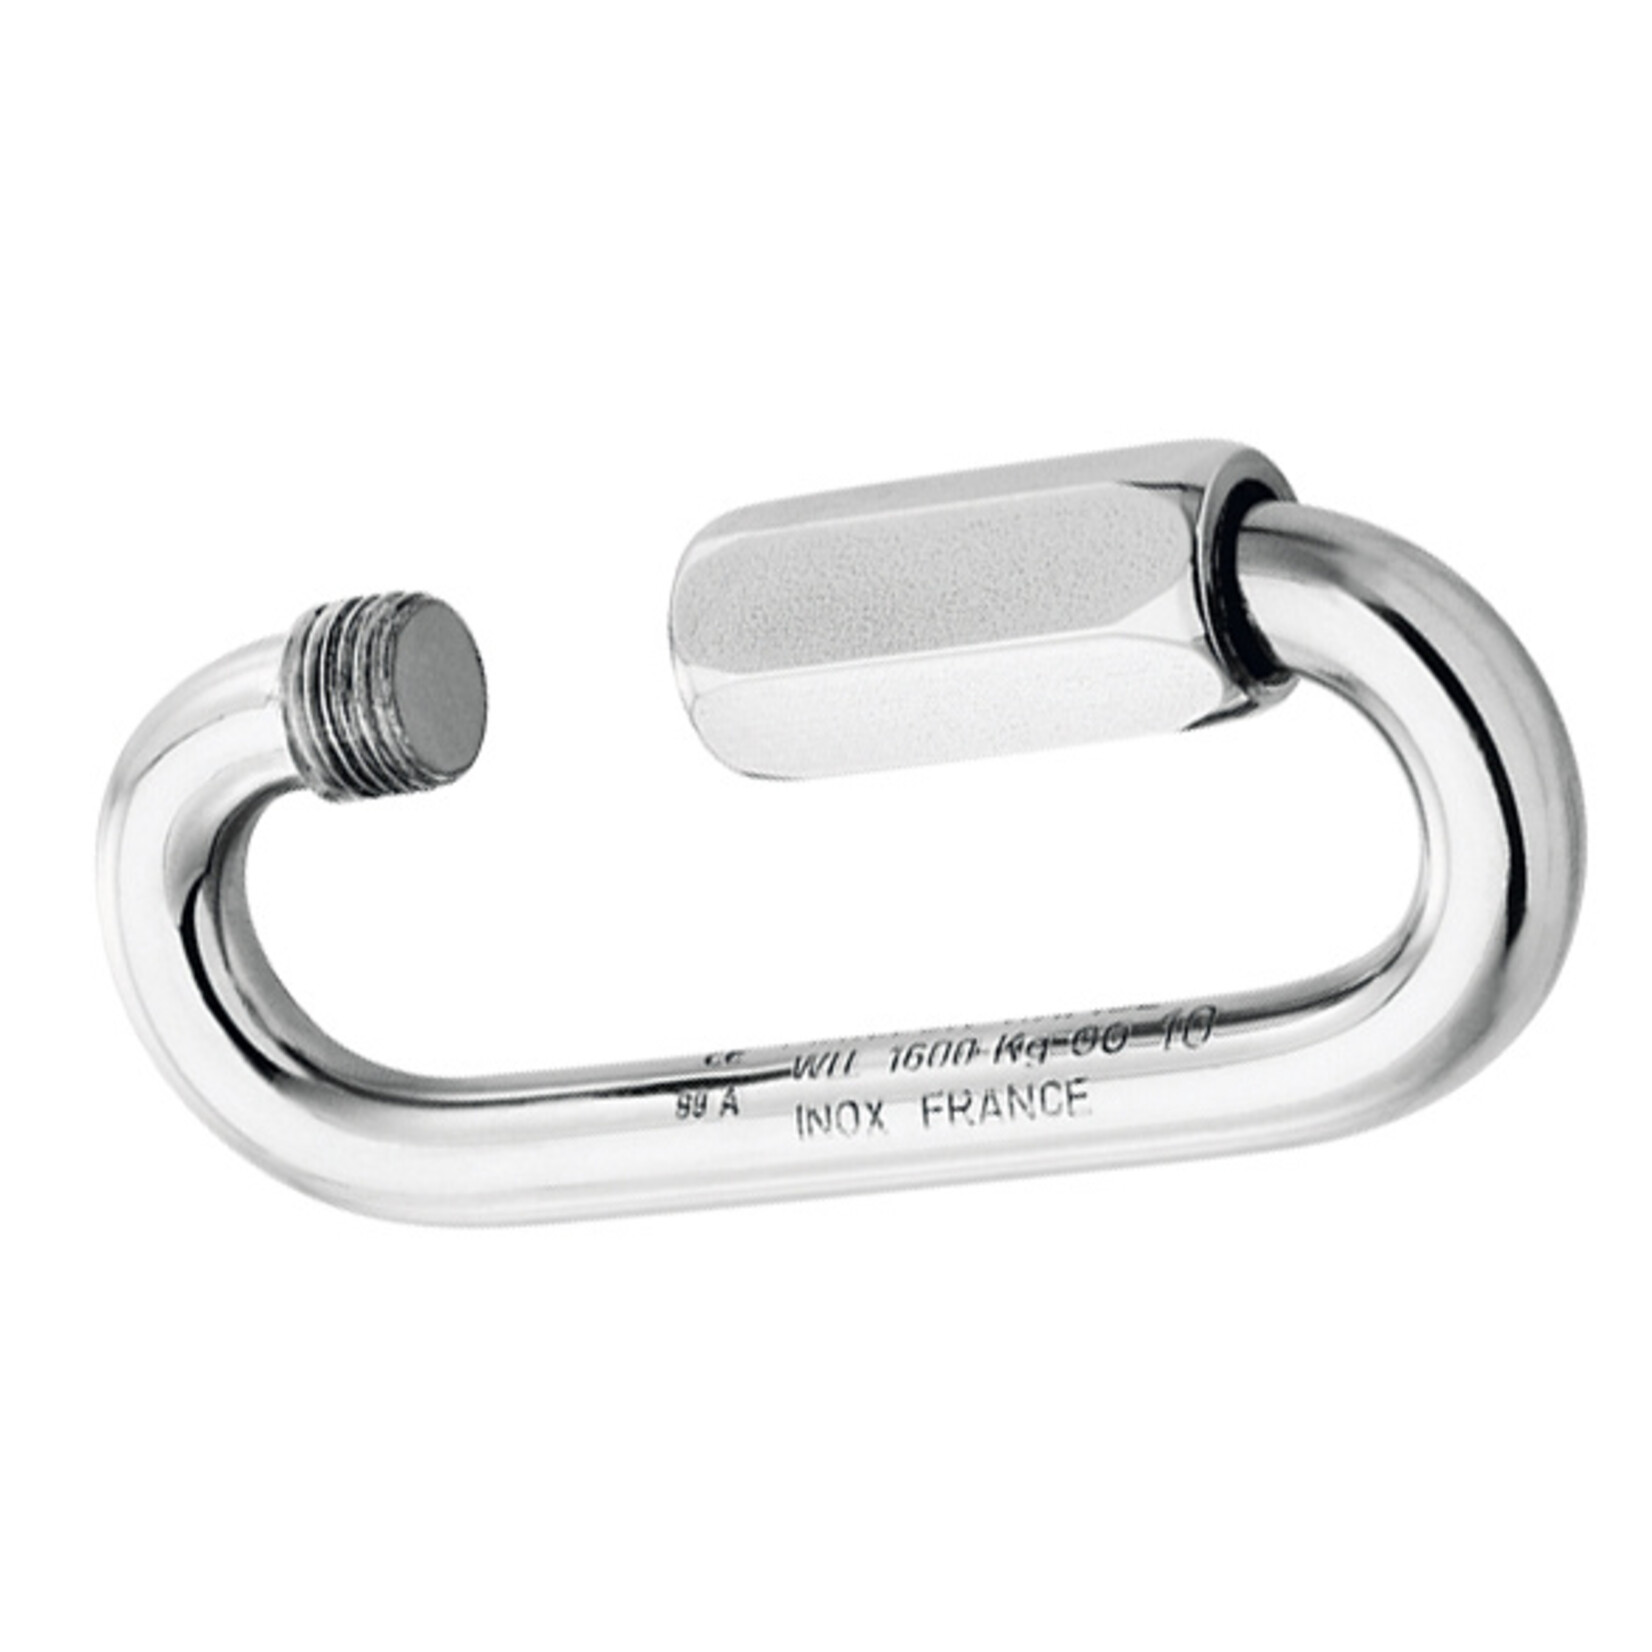 Plastimo Shackle express st.s big opening dia 8mm